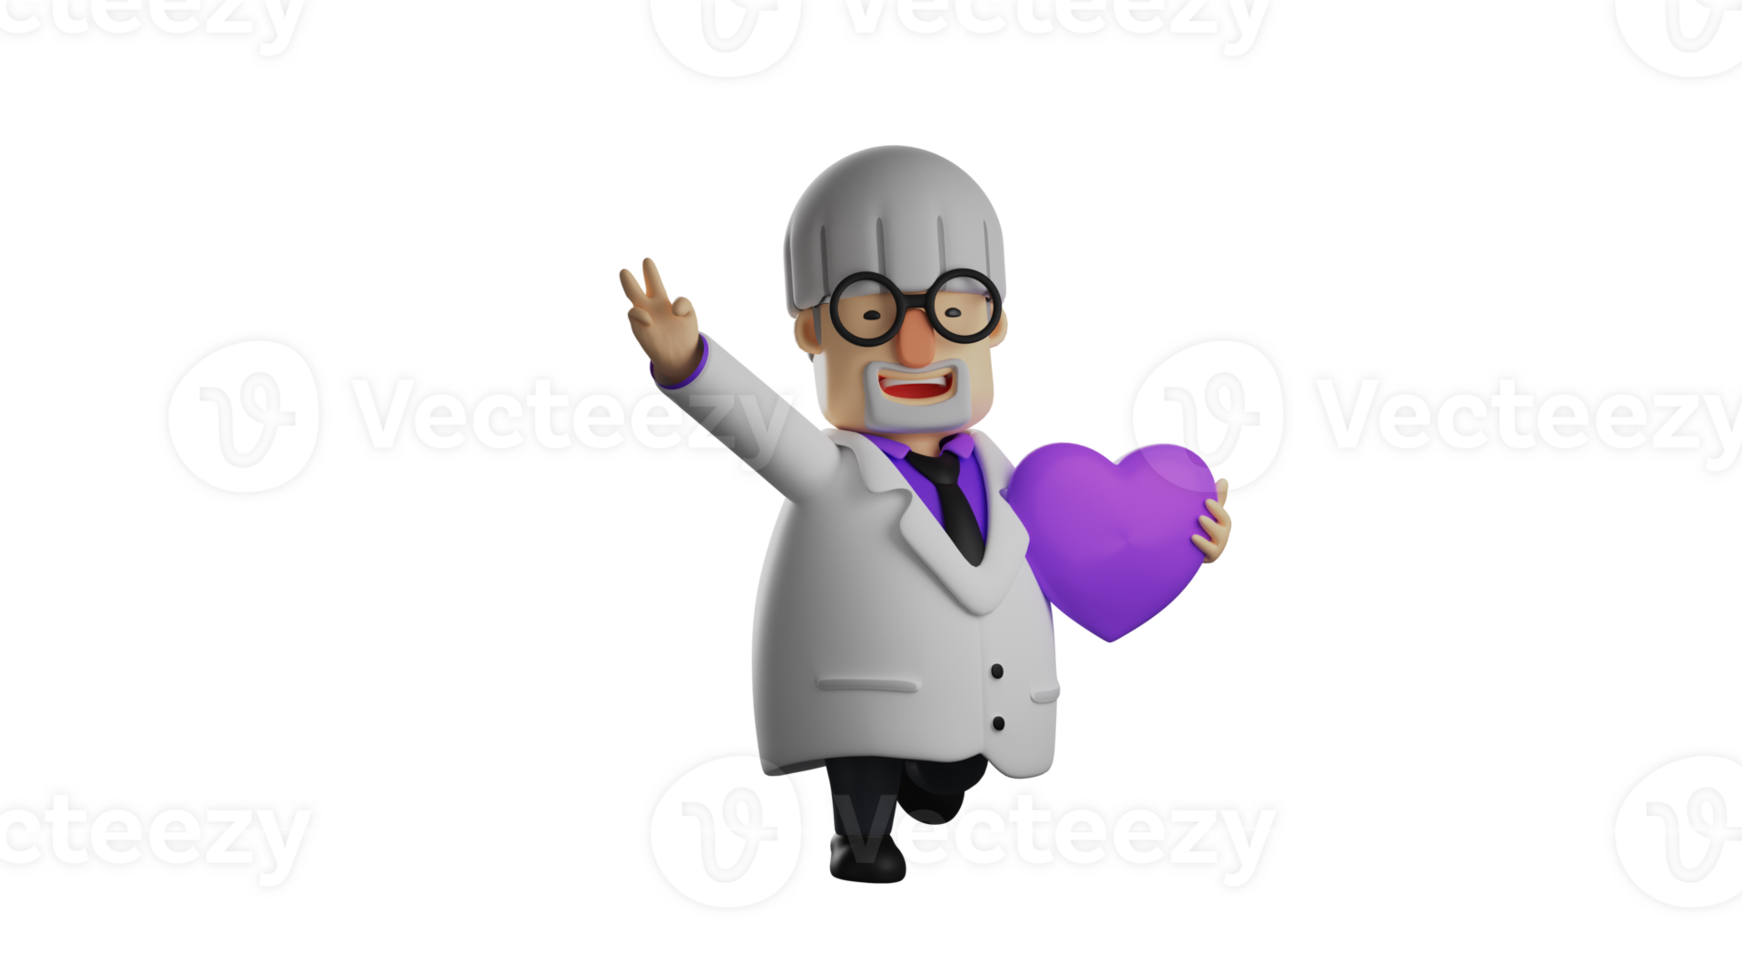 3D illustration. Romantic Professor 3D cartoon character. The scientist carries a purple heart symbol. The professor showed a peace sign with his finger and smiled happily. 3D cartoon character png